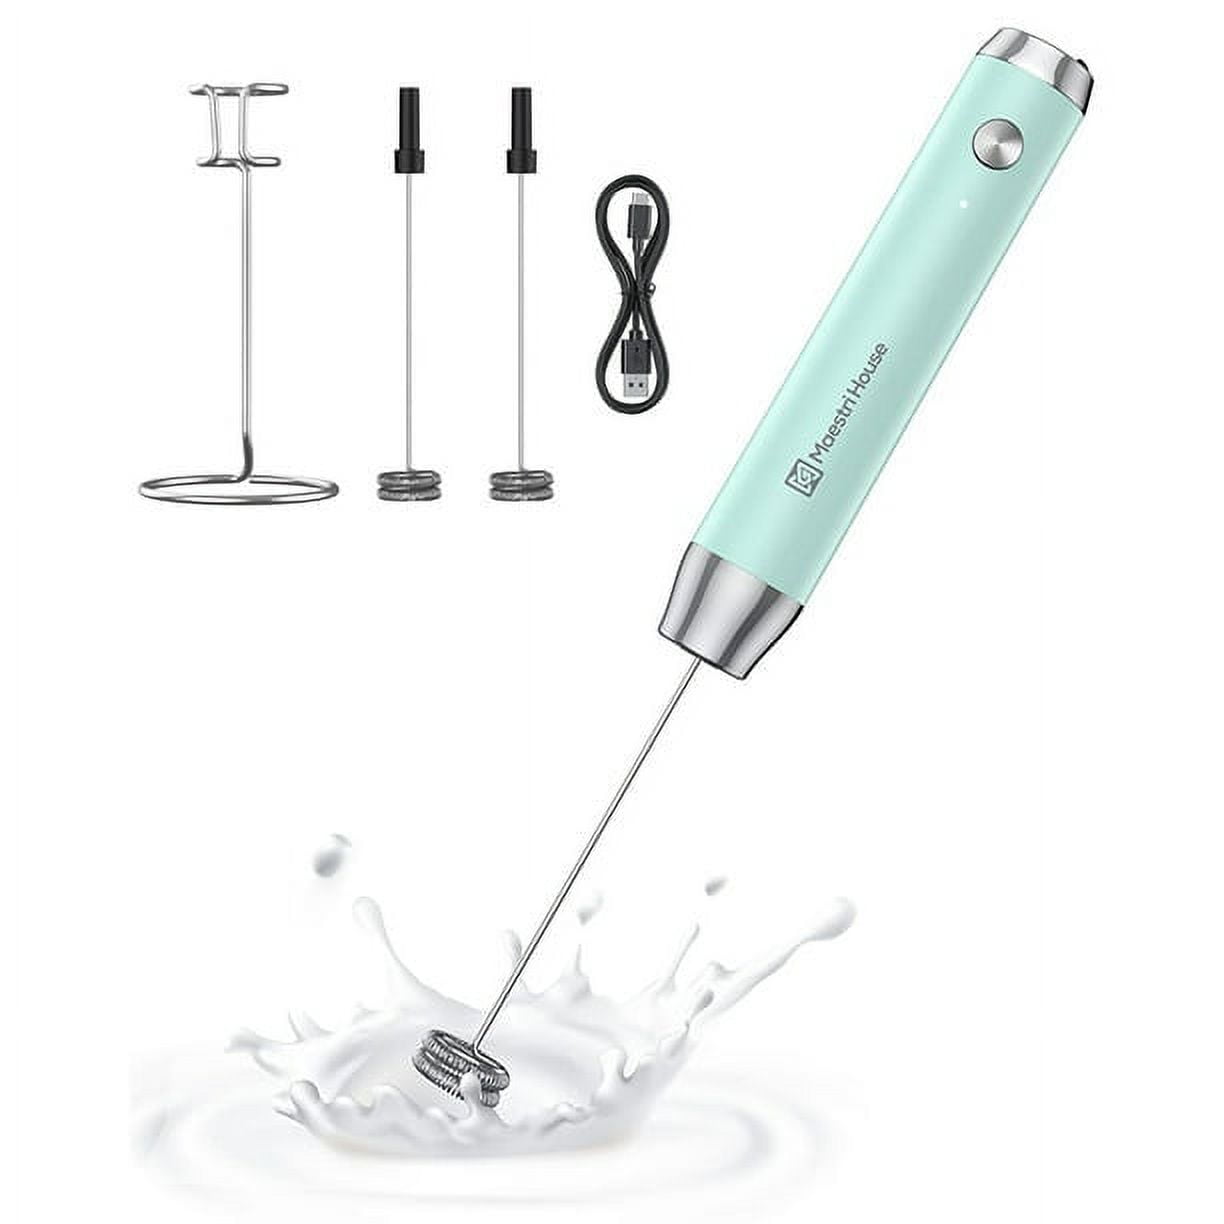 Electric Milk Frother Handheld, Maestri House USB Type-C